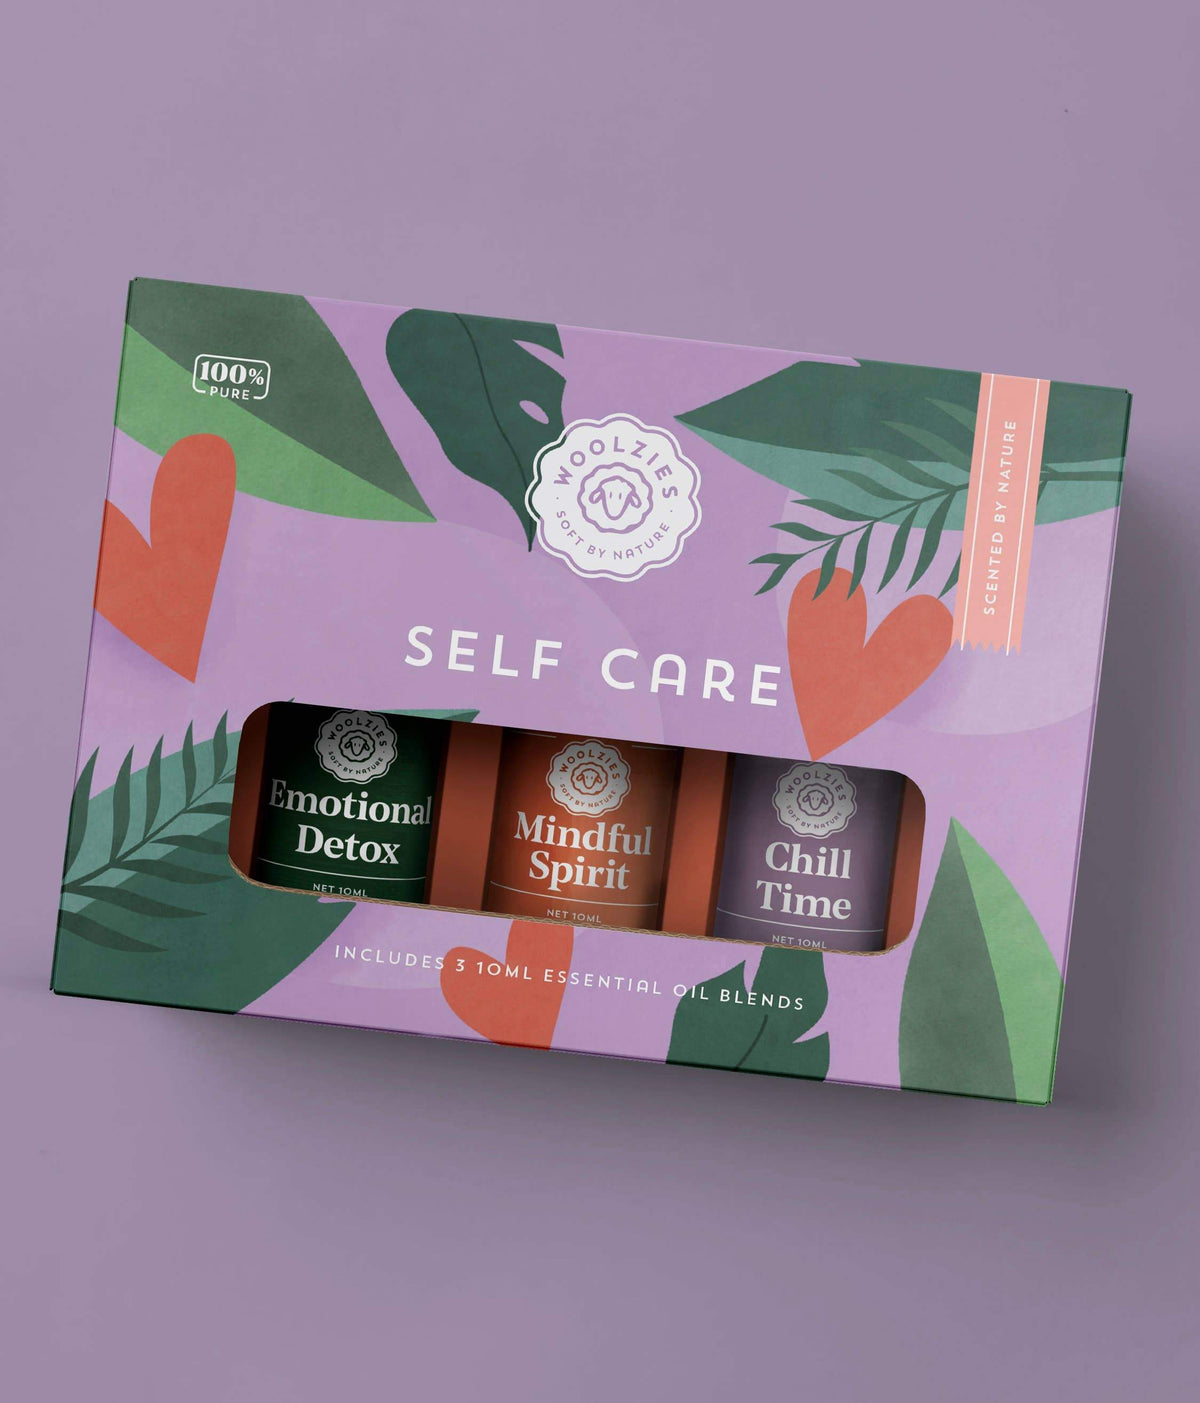 Product packaging of Woolzies The Self Care Collection essential oil blends featuring three types named emotional detox, mindful spirit, and chill time. The box has a green and purple design with leaf motifs.